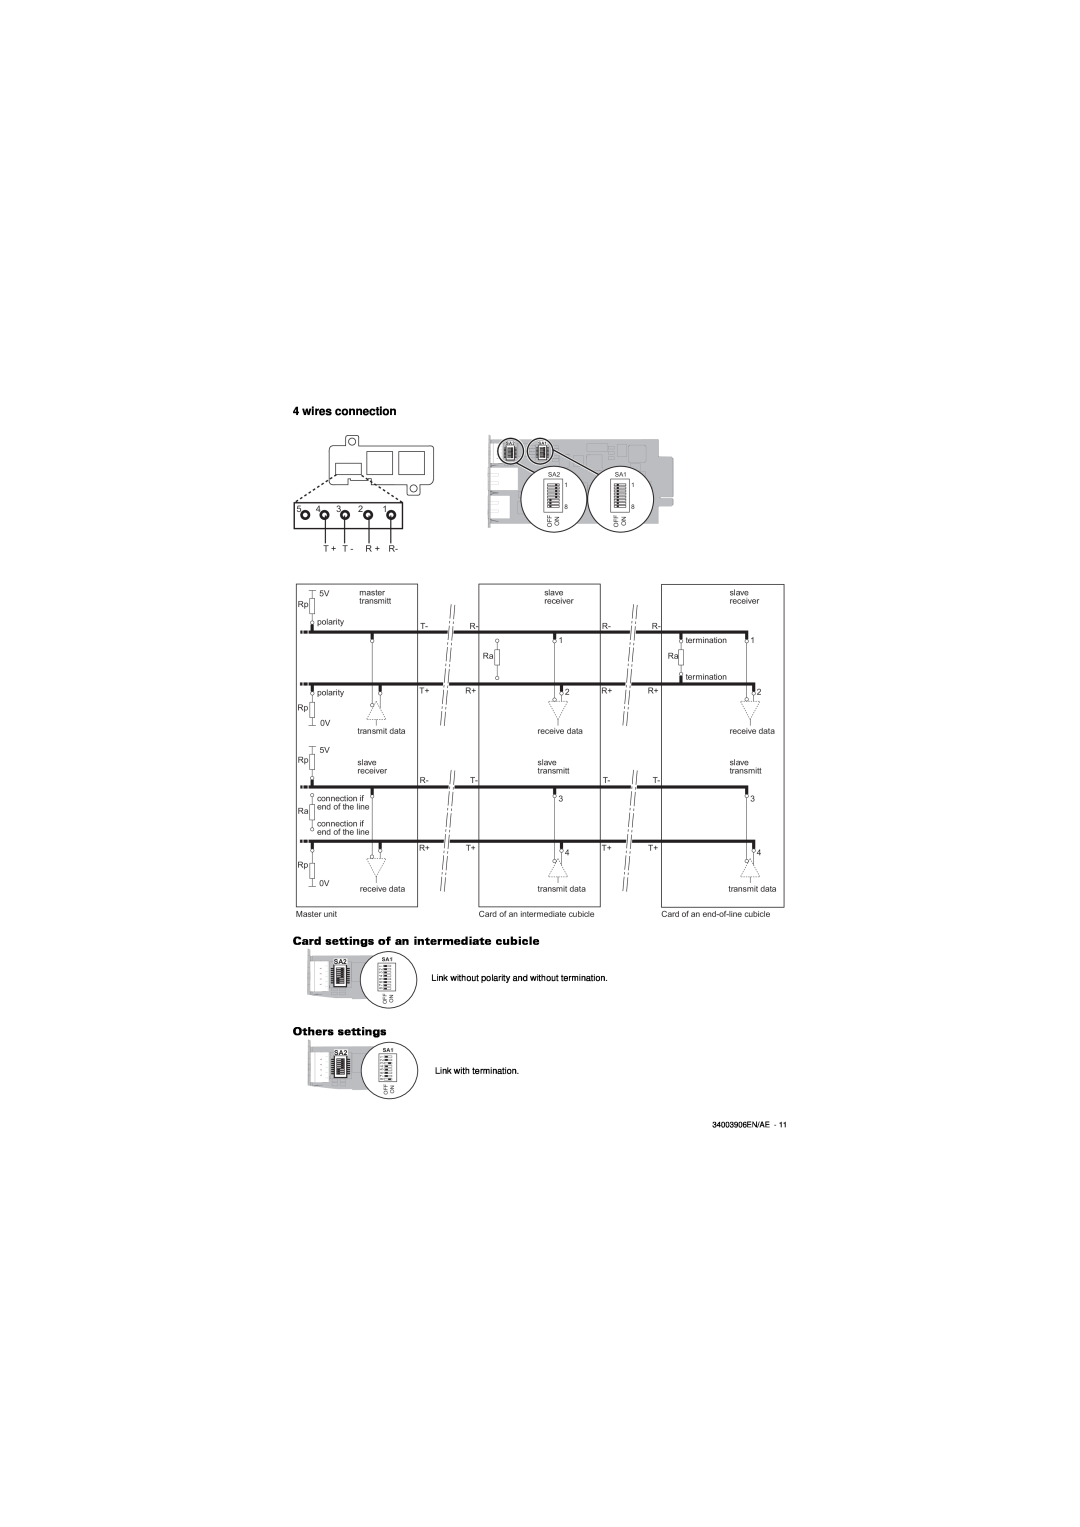 Eaton Electrical 66103 installation manual wires connection, Others settings, Card settings of an intermediate cubicle 